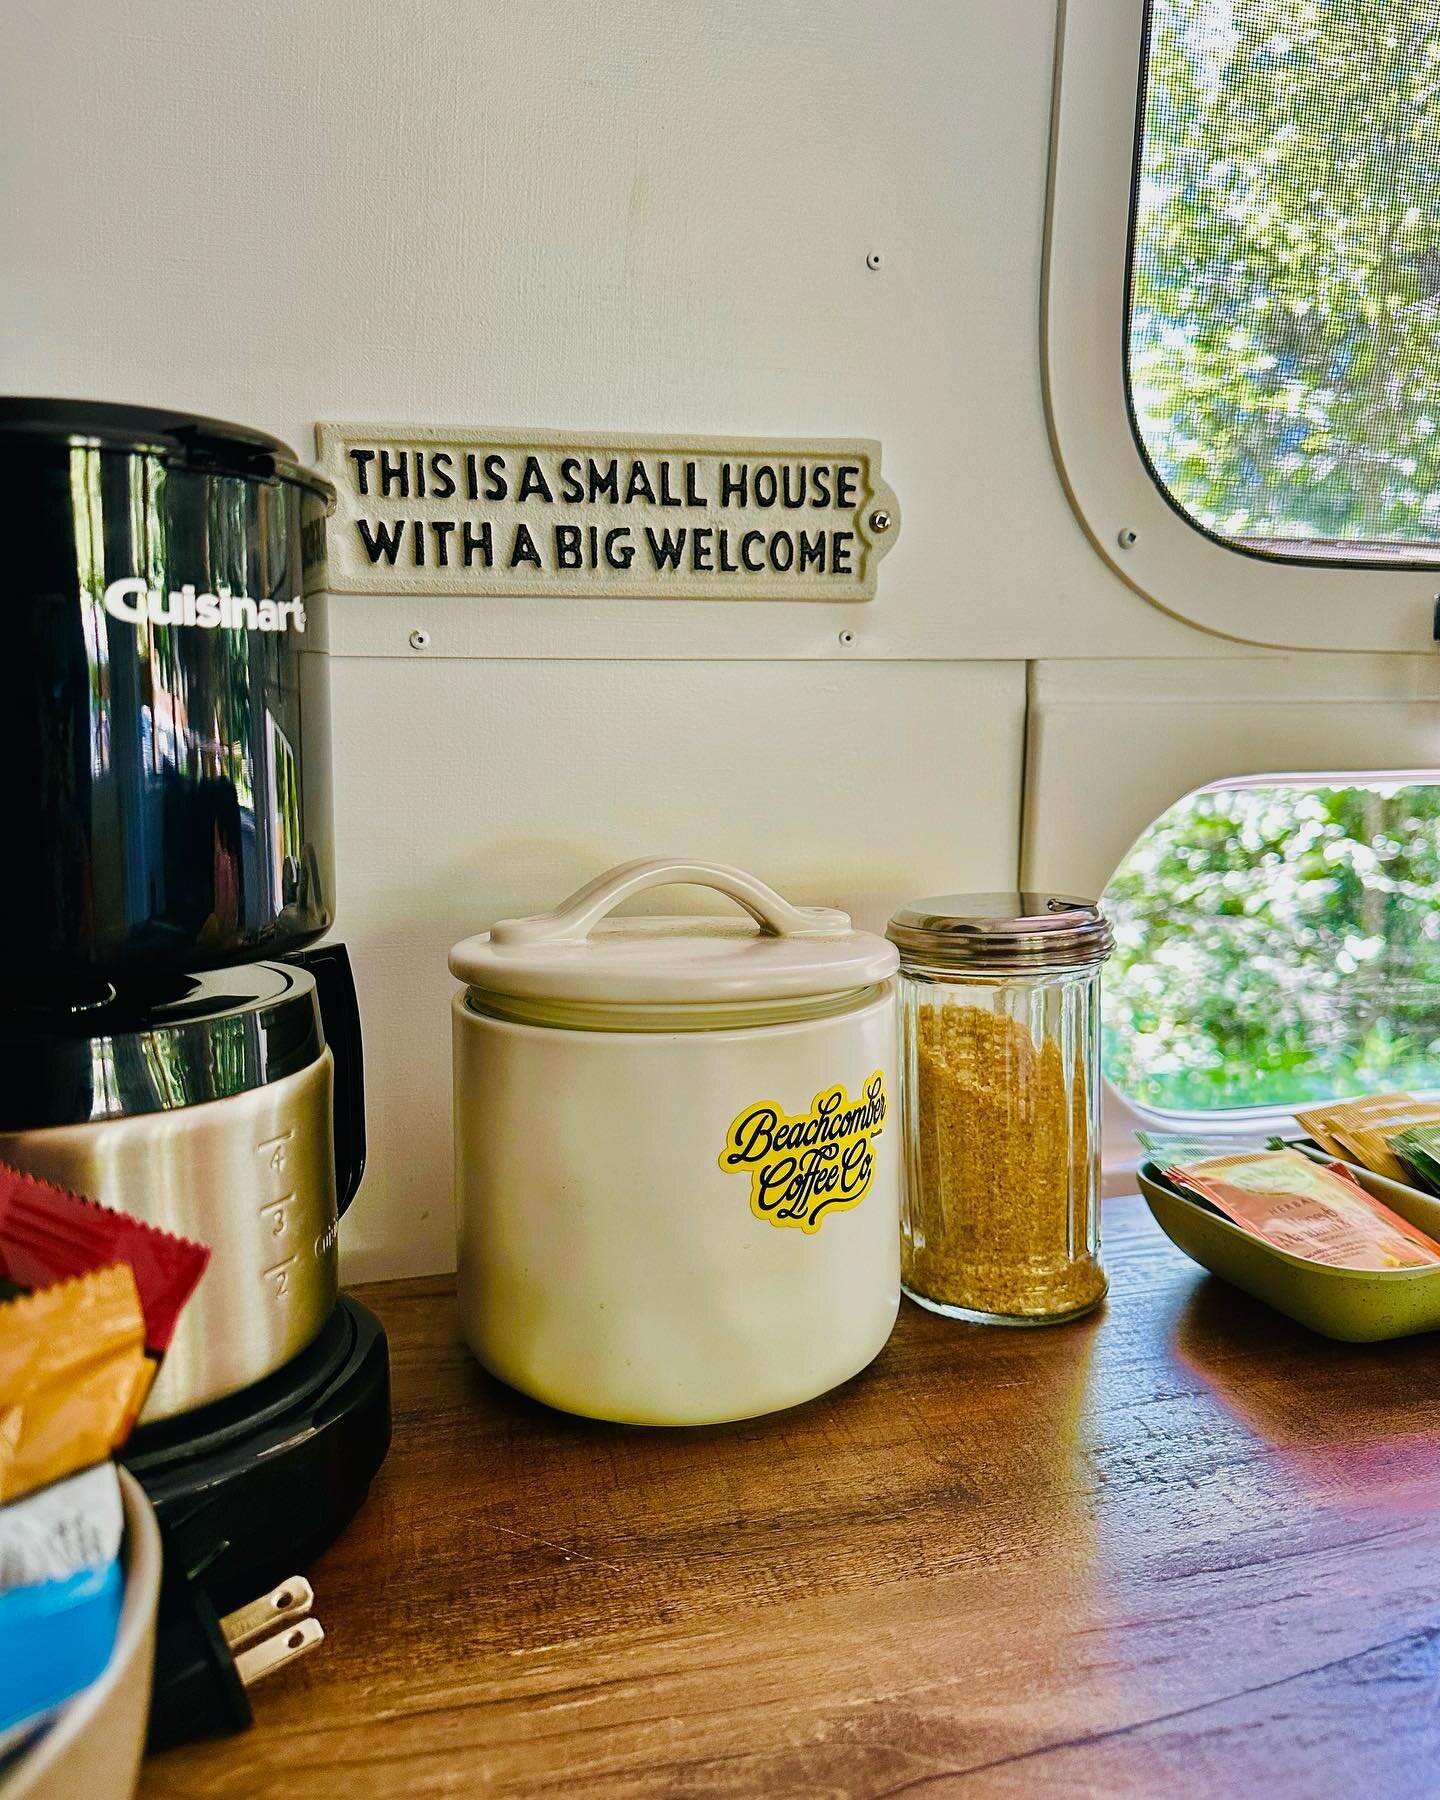 🌞 Good morning. ☕️ Welcome to the long weekend! 🎉✨

Our vintage Airstream is a world of retro charm and cozy vibes. 🚀✨ This little slice of paradise is oozing with unforgettable experiences and all the nostalgic feels. 🌼🌈 Our carefully curated r